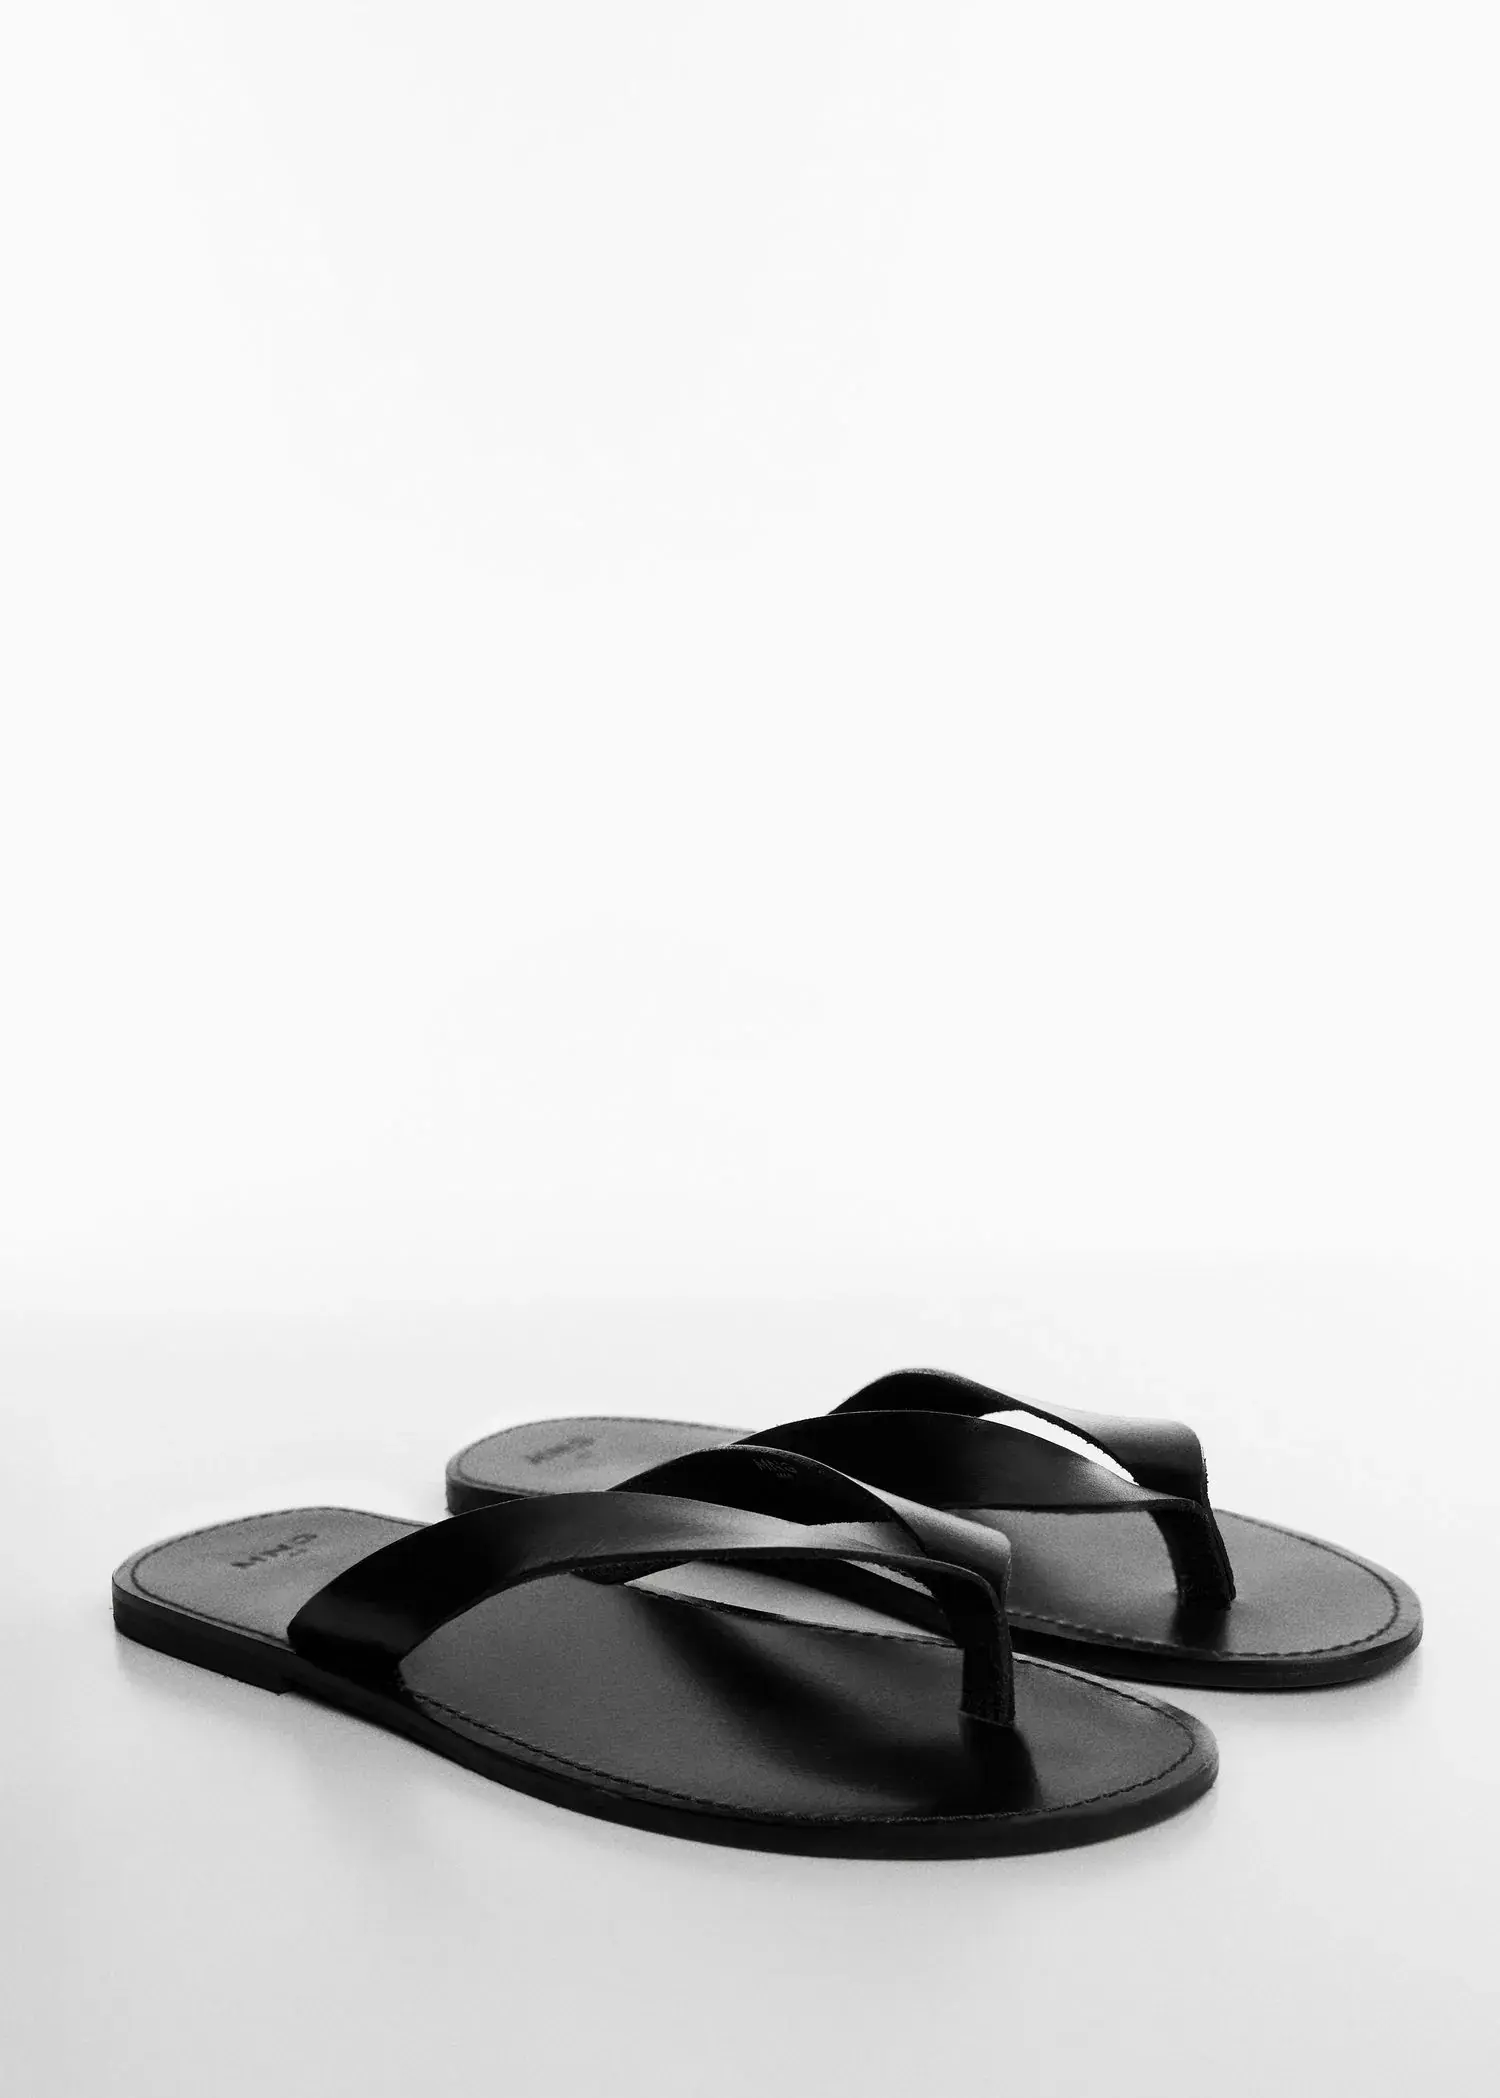 Mango Leather straps sandals. a pair of black flip flops sitting on top of a table. 